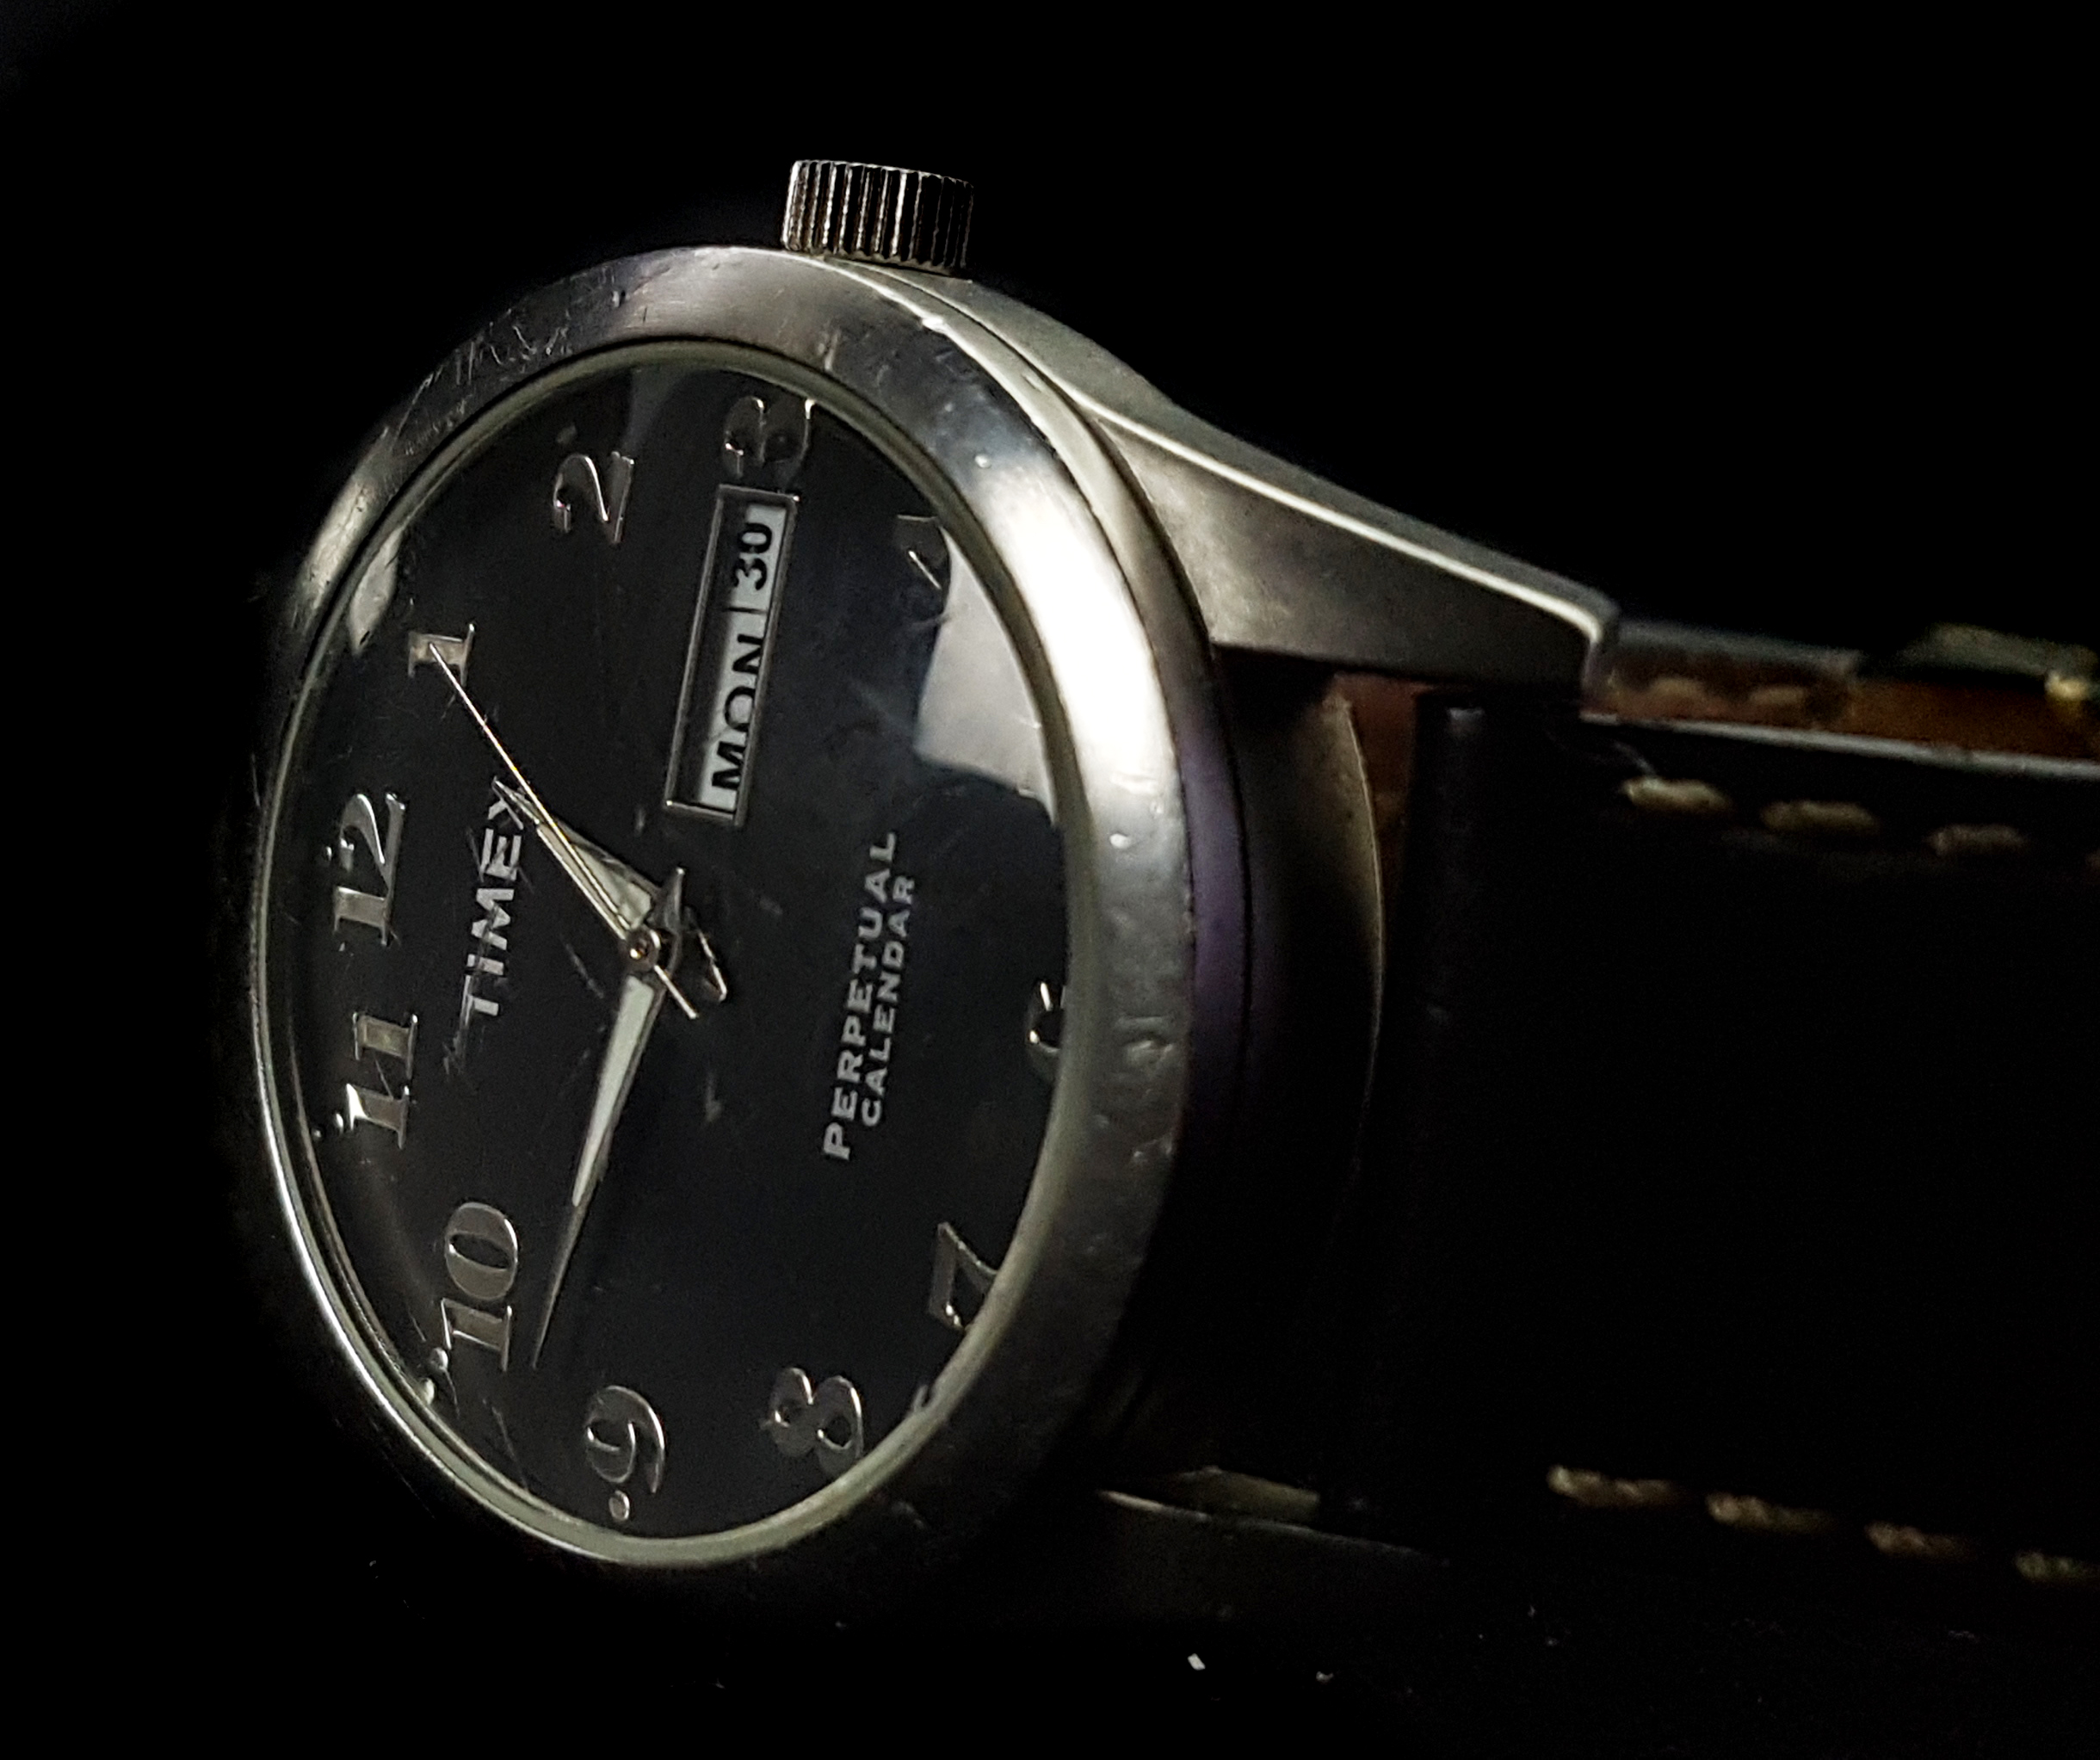 A Timex perpetual calendar wristwatch. Stainless steel, black dial with rectangular day and date